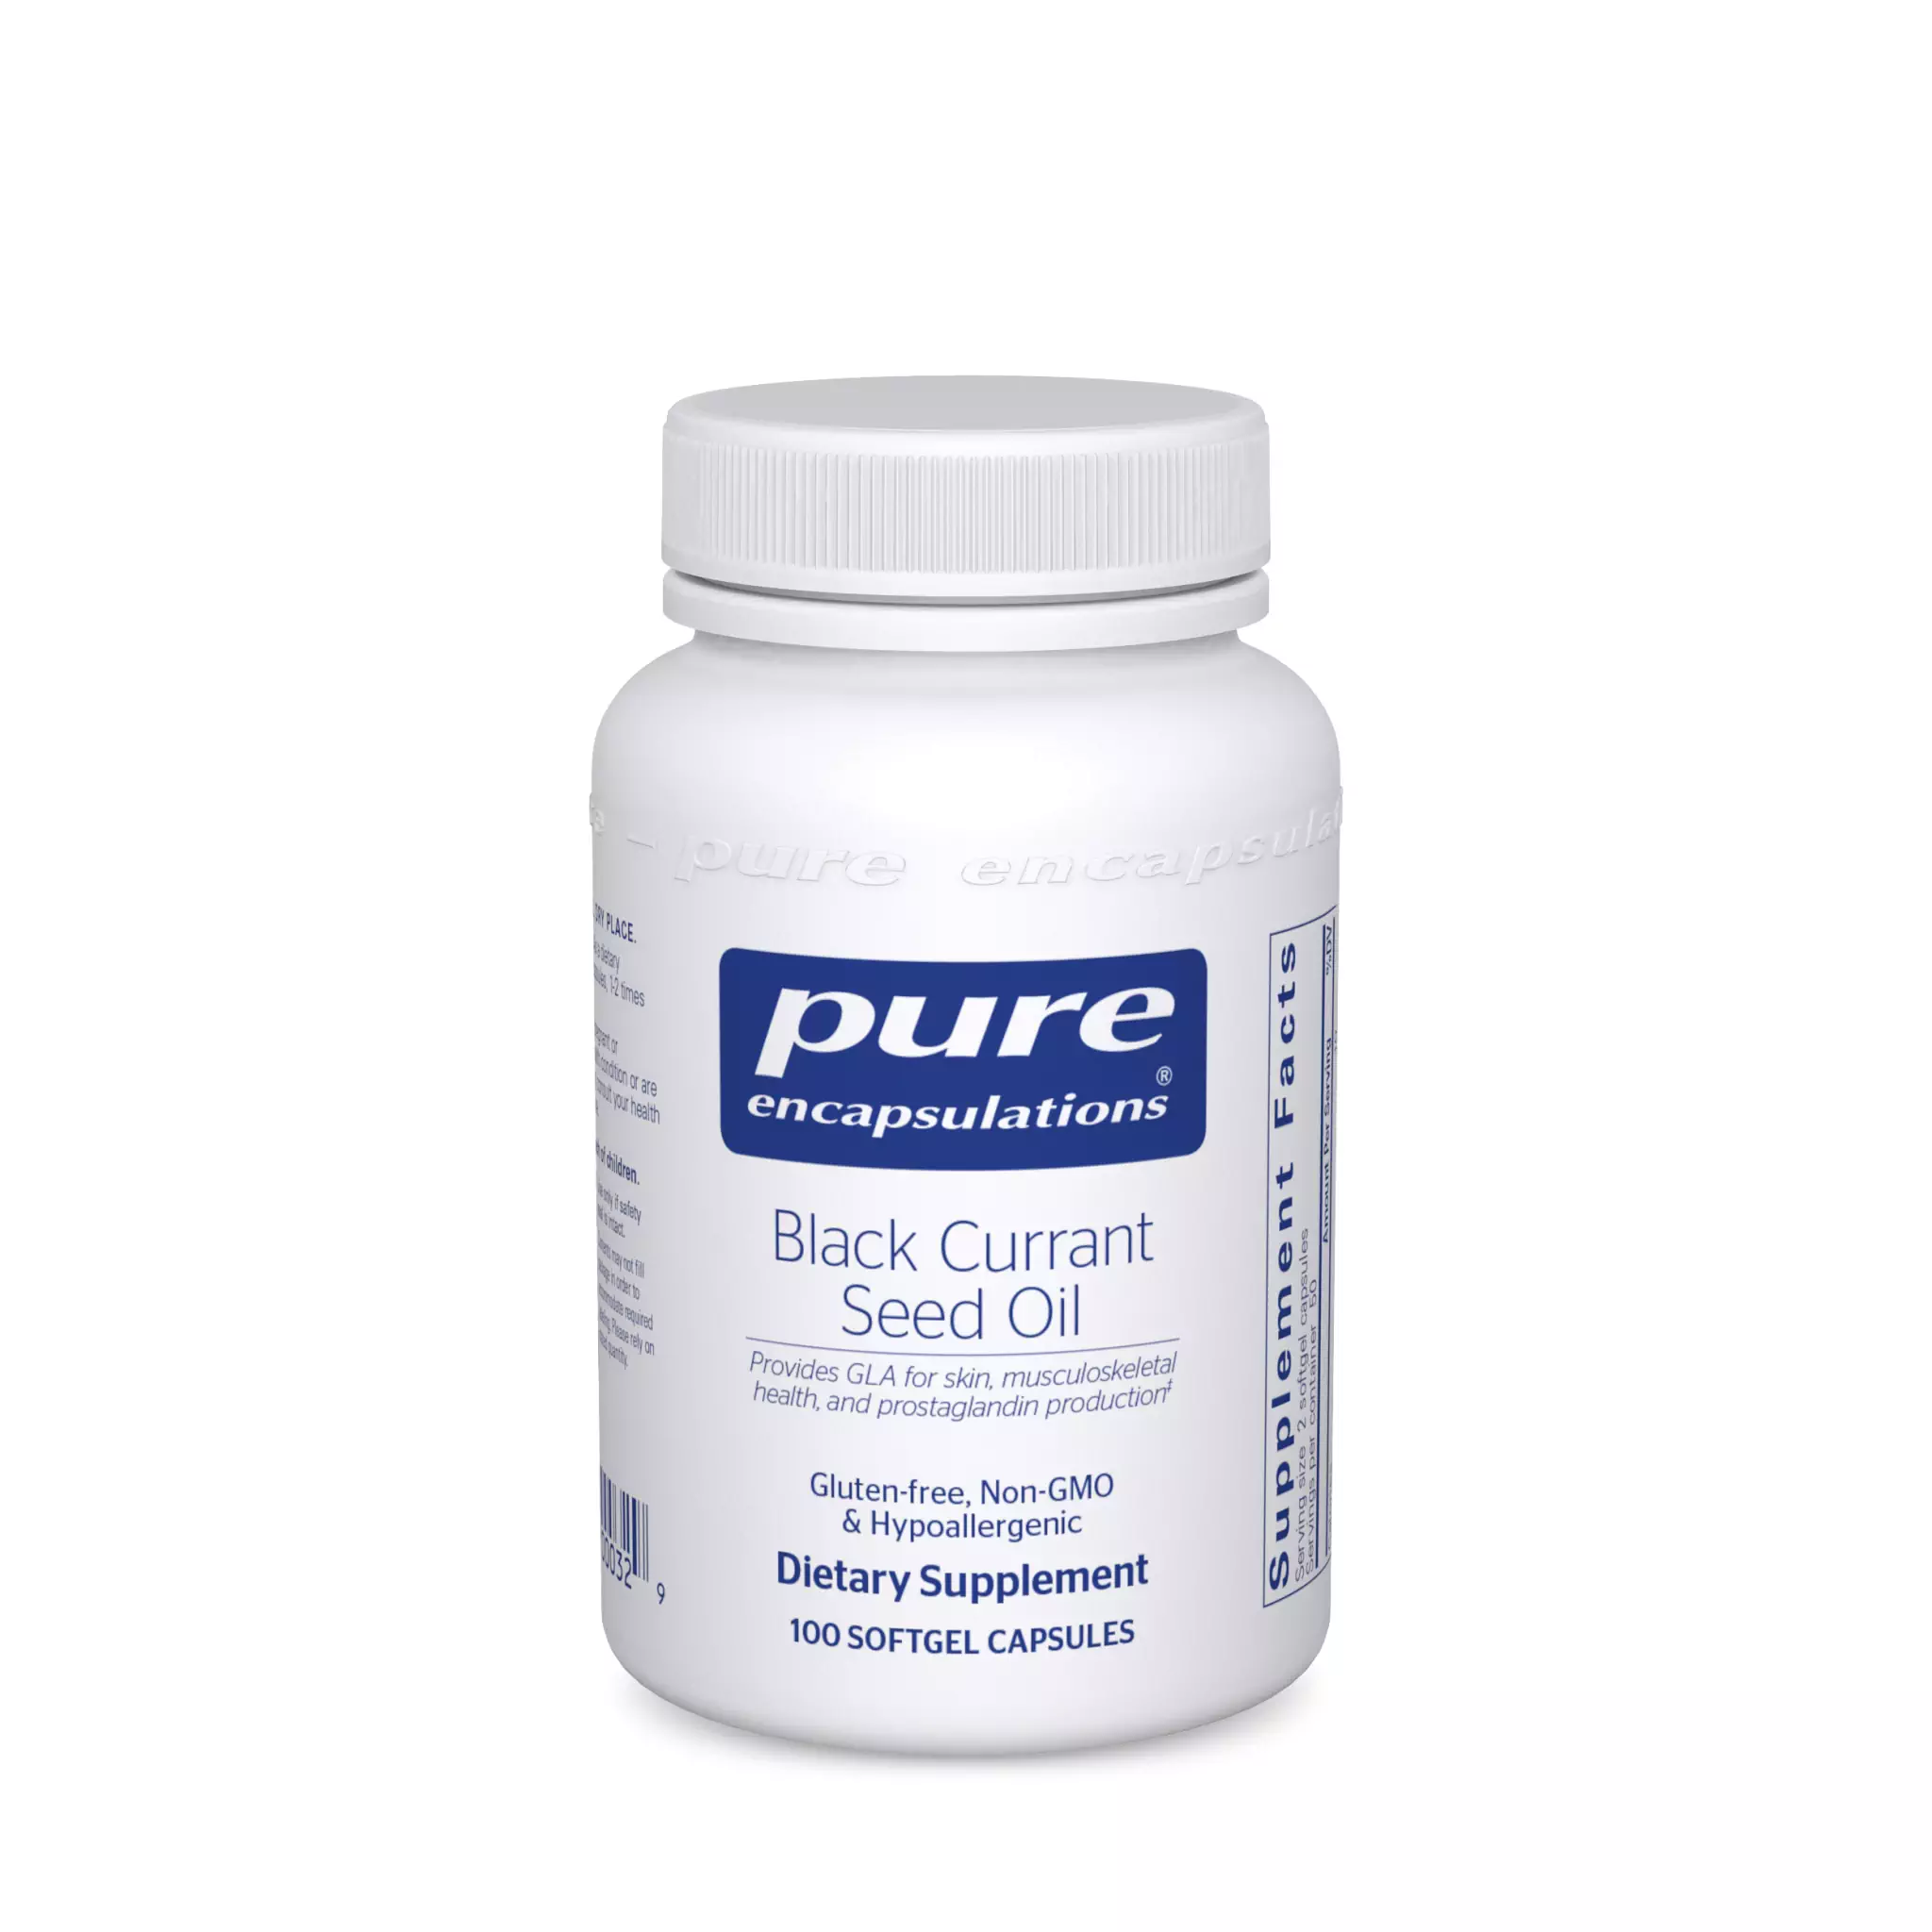 Pure Encapsulations - Black Currant Seed Oil 500 mg